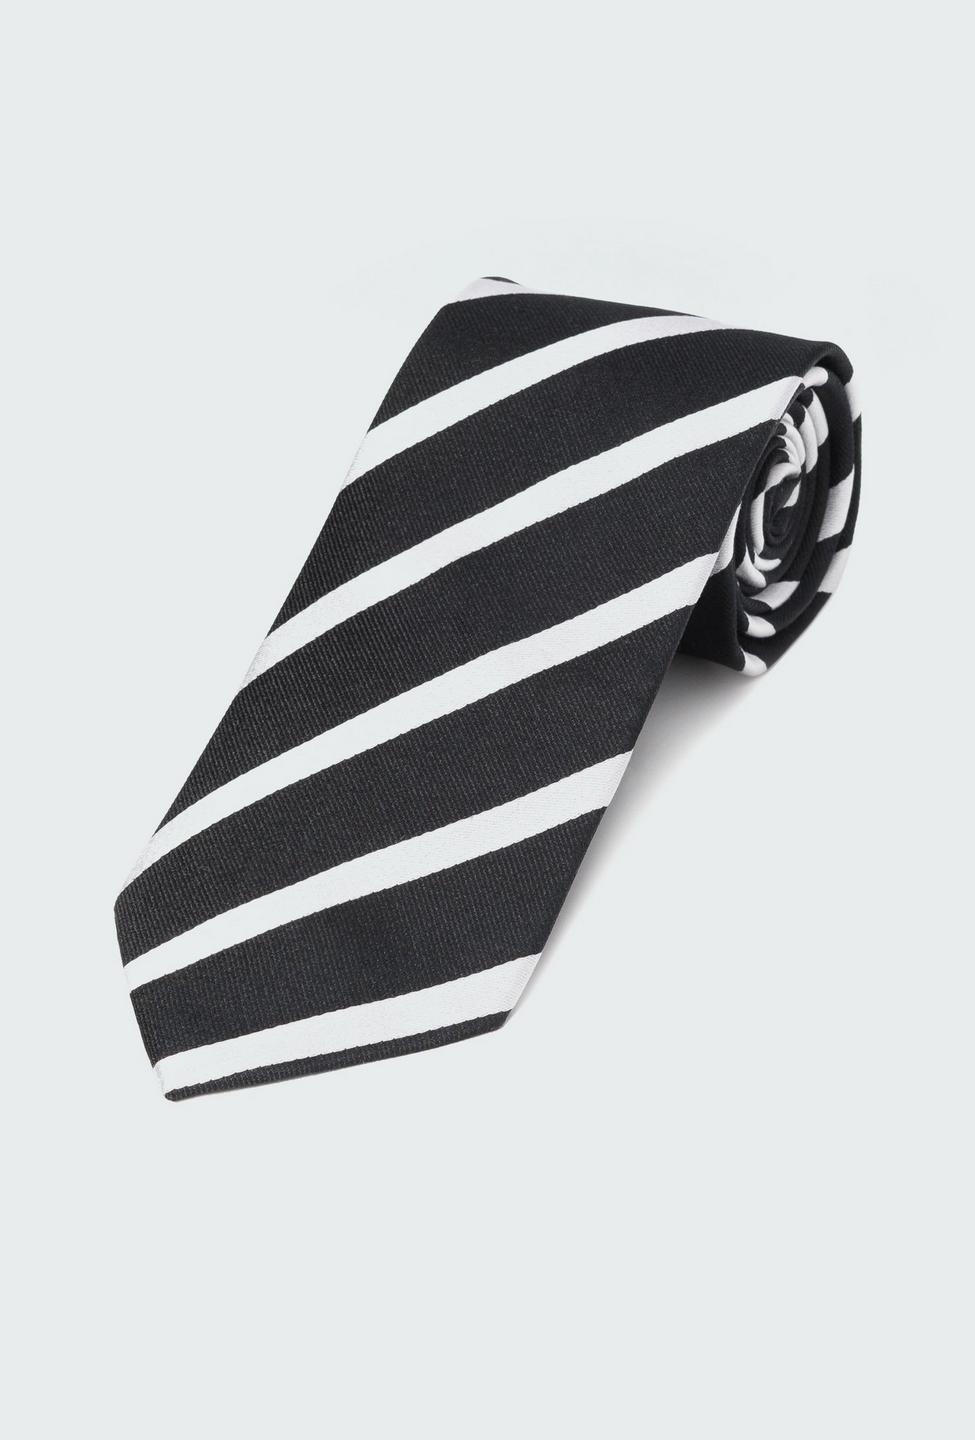 Black tie - Striped Design from Indochino Collection